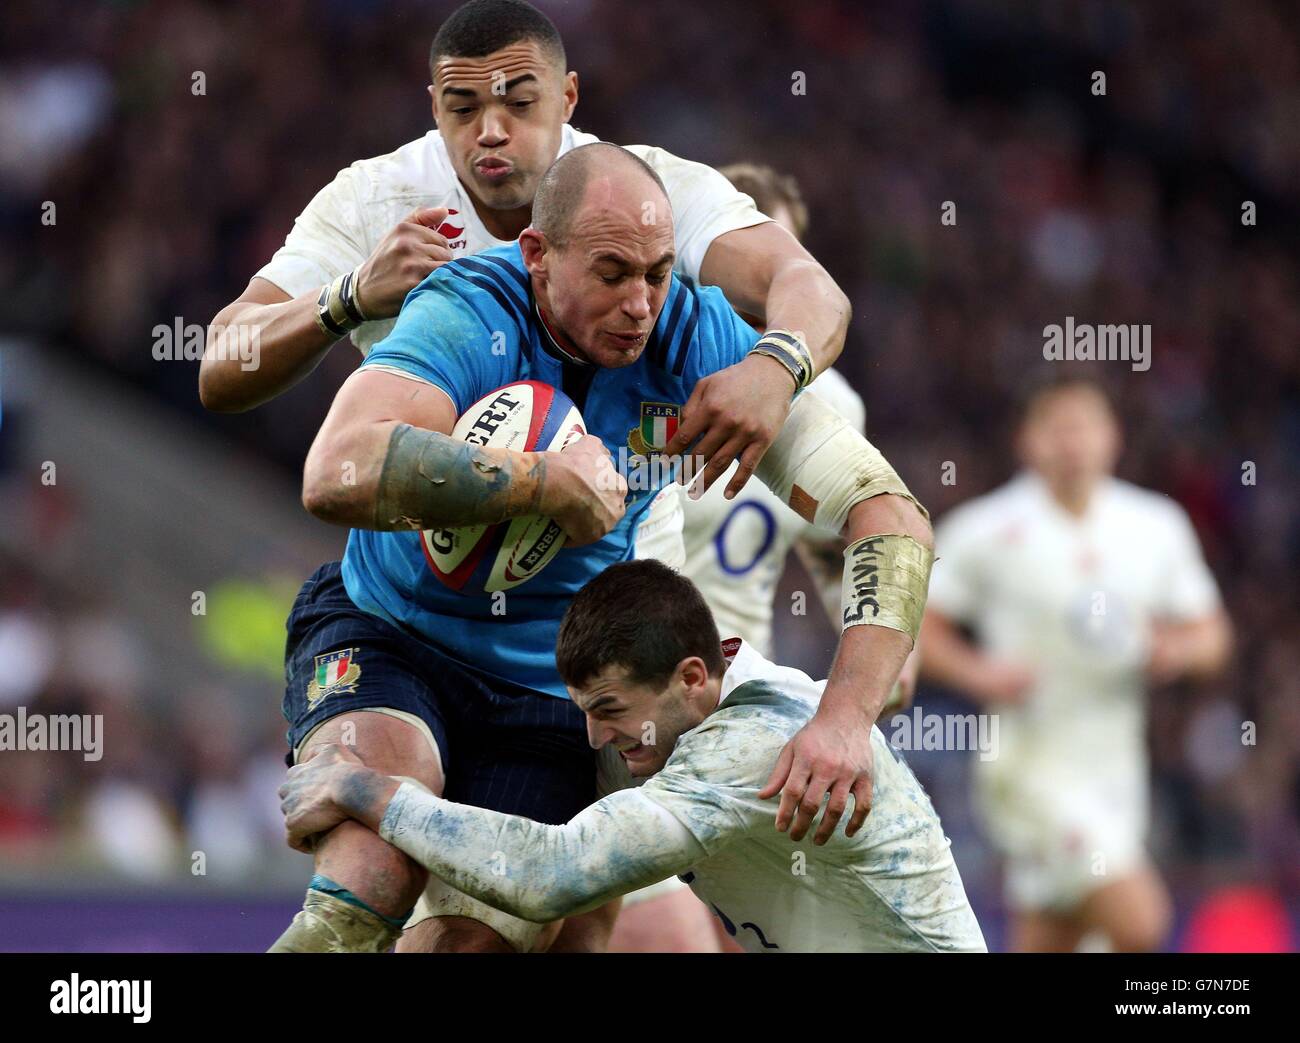 Rugby Union - 2015 RBS Six Nations - England v Italy - Twickenham. Italy's Sergio Parisse is tackled by England's Luther Burrell (above) and jonny May during the 6 Nations match at Twickenham, London. Stock Photo